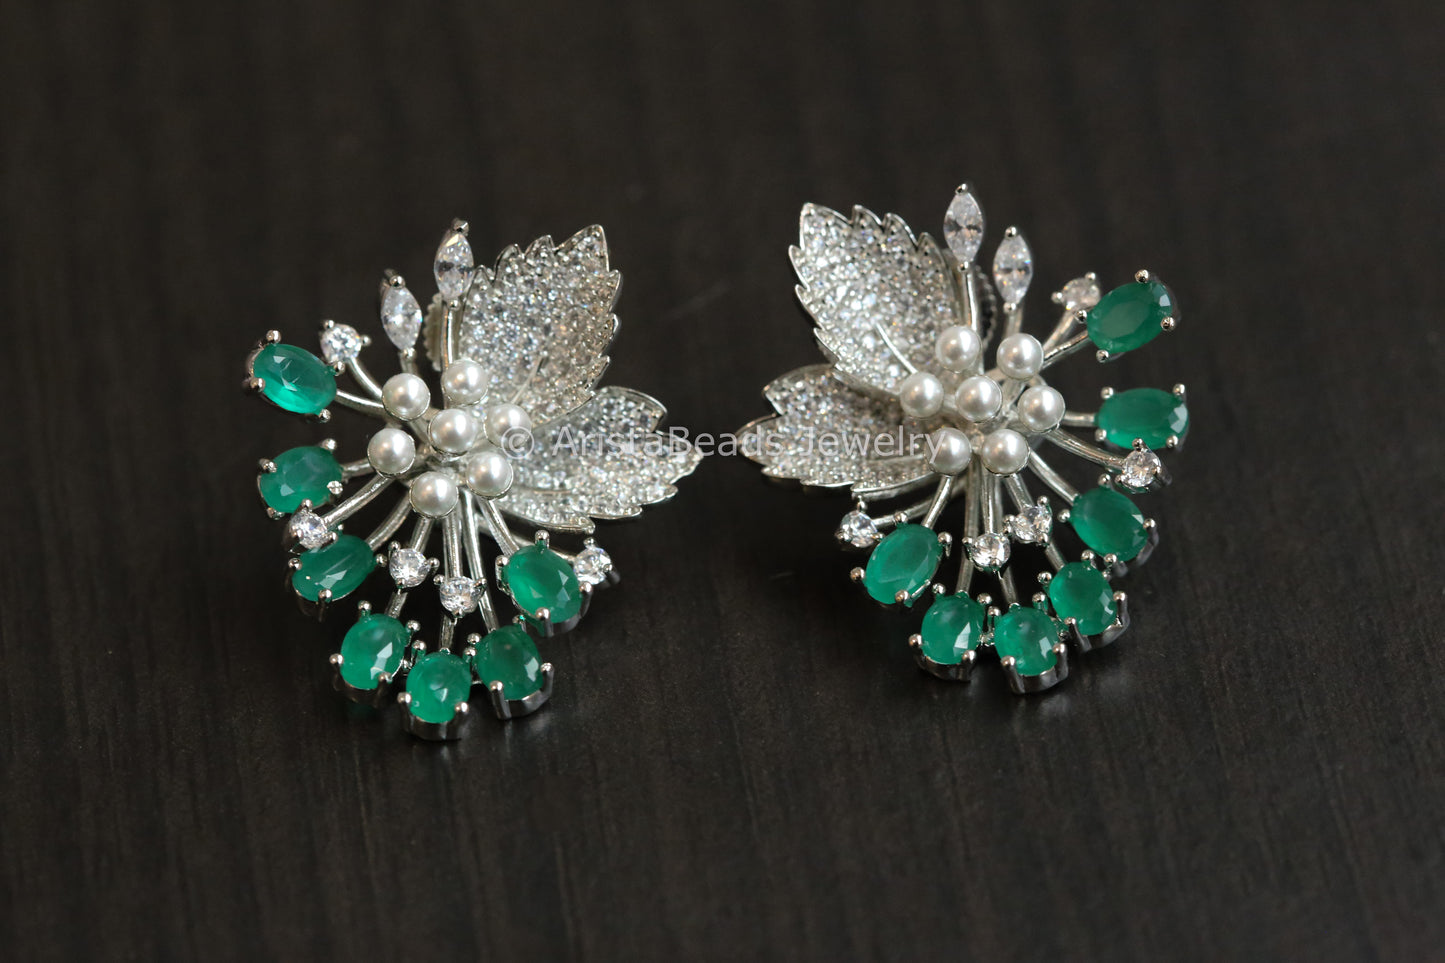 Contemporary CZ & Pearls Earrings - Emerald